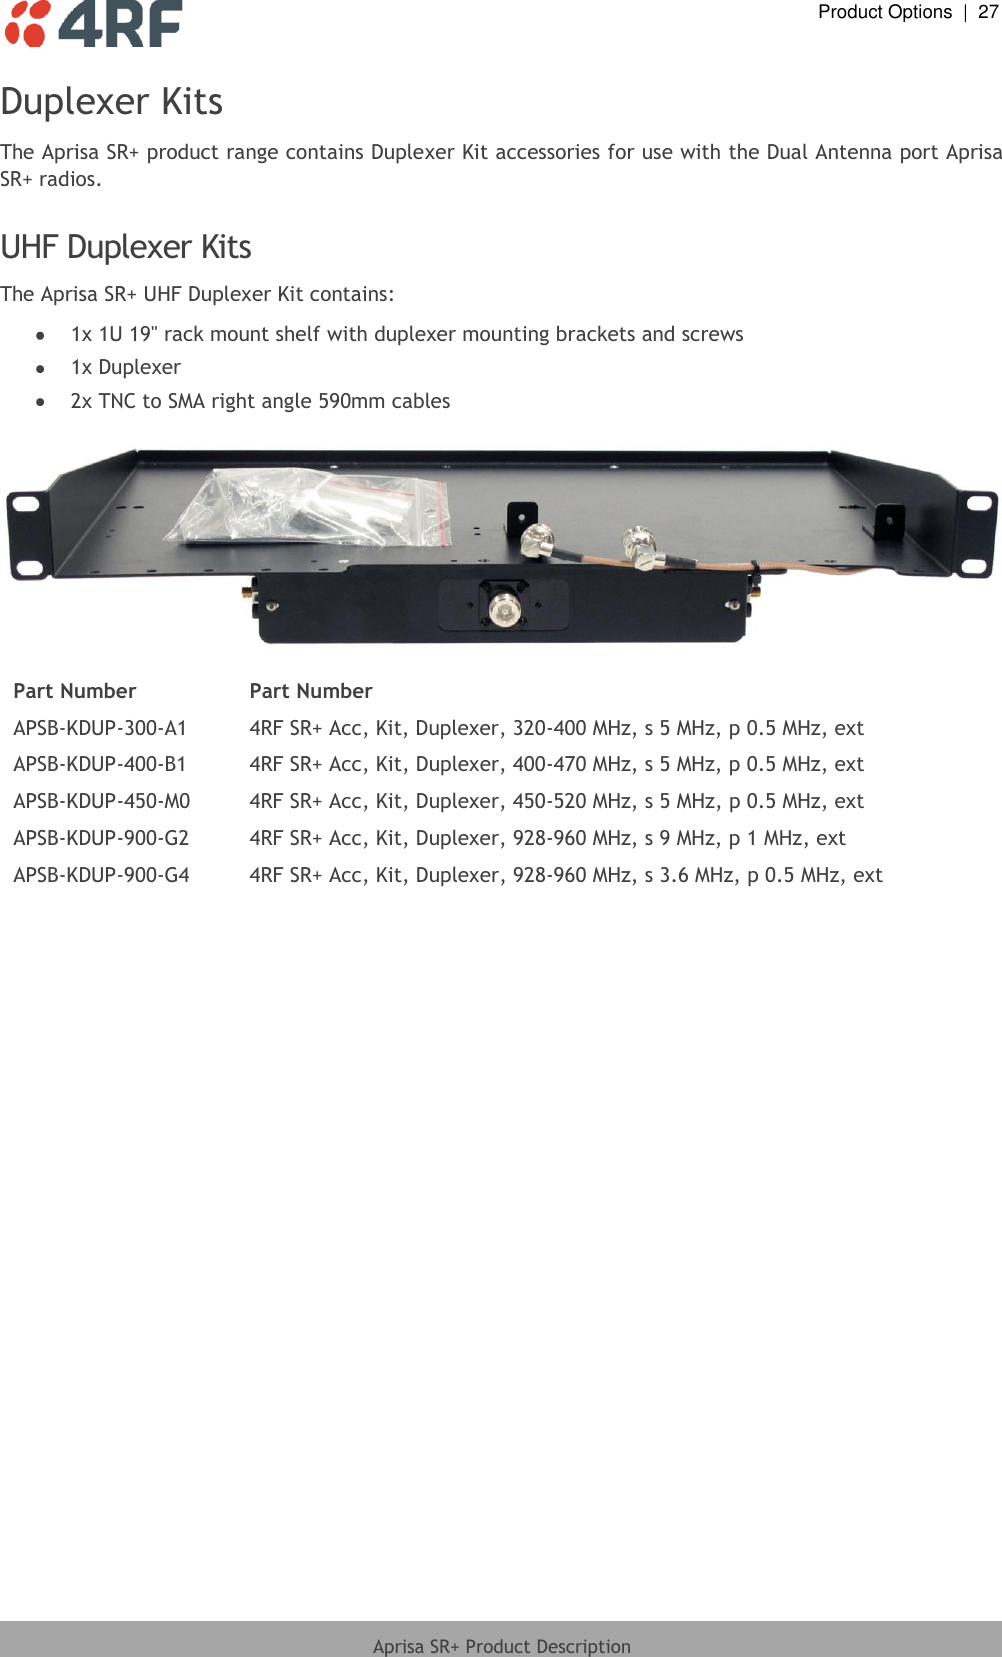  Product Options  |  27  Aprisa SR+ Product Description  Duplexer Kits The Aprisa SR+ product range contains Duplexer Kit accessories for use with the Dual Antenna port Aprisa SR+ radios.  UHF Duplexer Kits The Aprisa SR+ UHF Duplexer Kit contains:  1x 1U 19&quot; rack mount shelf with duplexer mounting brackets and screws  1x Duplexer  2x TNC to SMA right angle 590mm cables    Part Number Part Number APSB-KDUP-300-A1 4RF SR+ Acc, Kit, Duplexer, 320-400 MHz, s 5 MHz, p 0.5 MHz, ext APSB-KDUP-400-B1 4RF SR+ Acc, Kit, Duplexer, 400-470 MHz, s 5 MHz, p 0.5 MHz, ext APSB-KDUP-450-M0 4RF SR+ Acc, Kit, Duplexer, 450-520 MHz, s 5 MHz, p 0.5 MHz, ext APSB-KDUP-900-G2 4RF SR+ Acc, Kit, Duplexer, 928-960 MHz, s 9 MHz, p 1 MHz, ext APSB-KDUP-900-G4 4RF SR+ Acc, Kit, Duplexer, 928-960 MHz, s 3.6 MHz, p 0.5 MHz, ext  